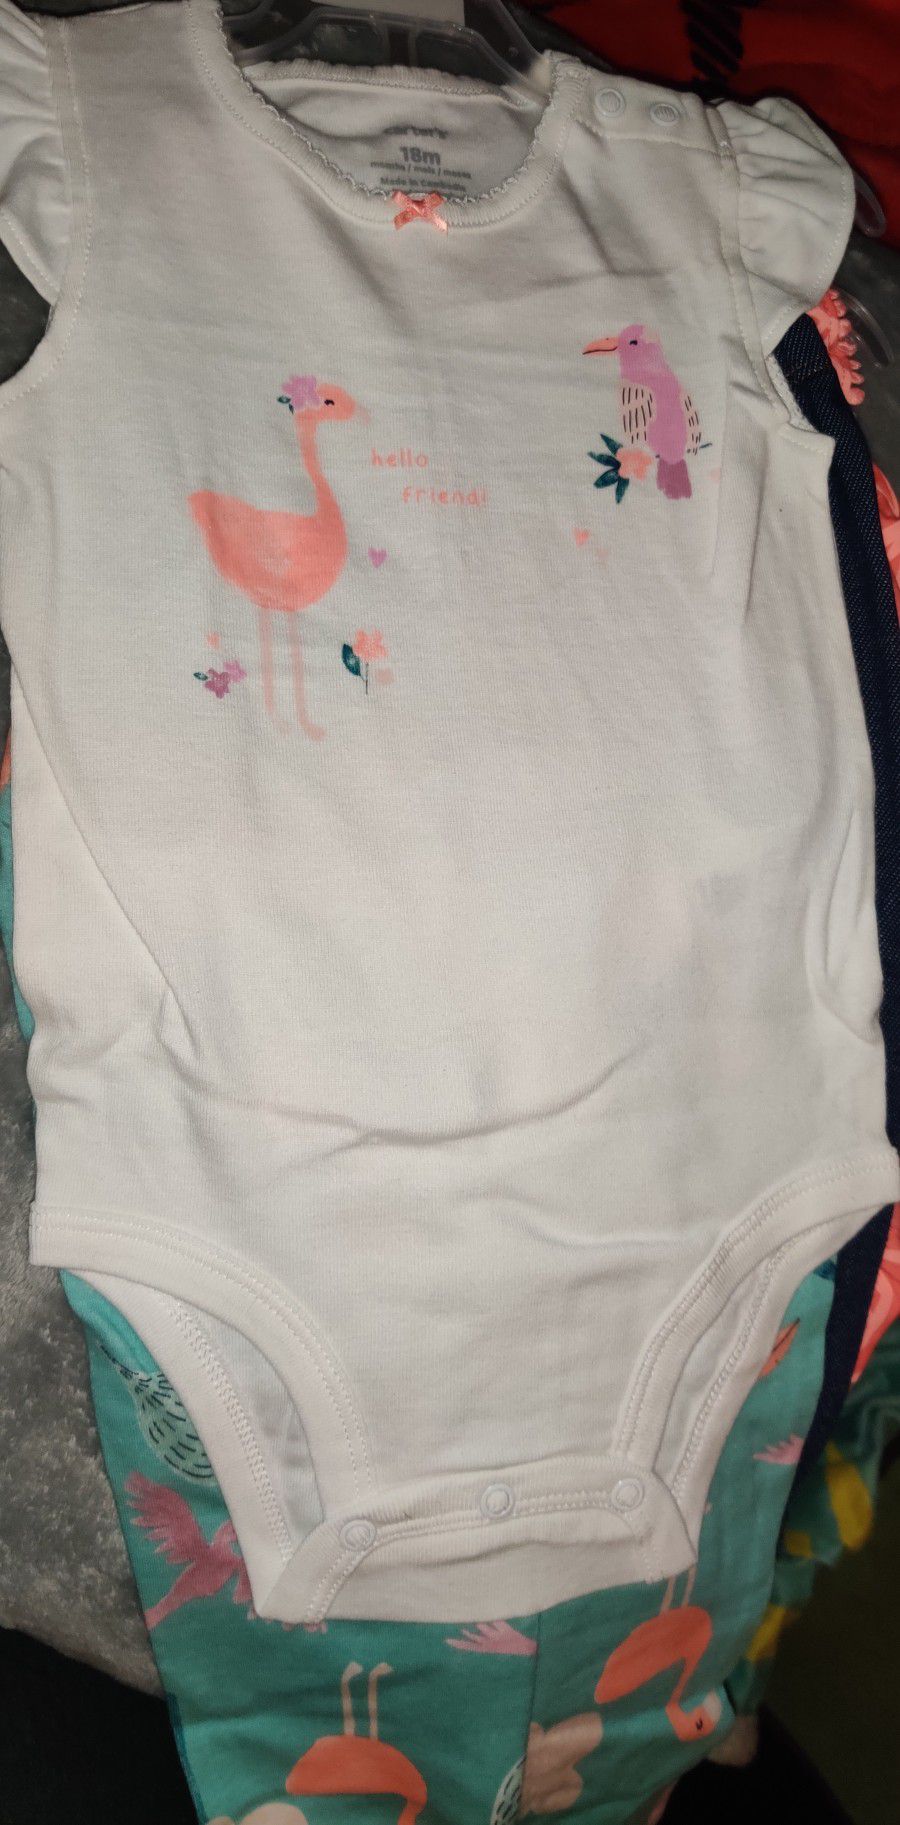 New 4pc Carter's Outfits. Size 18mos